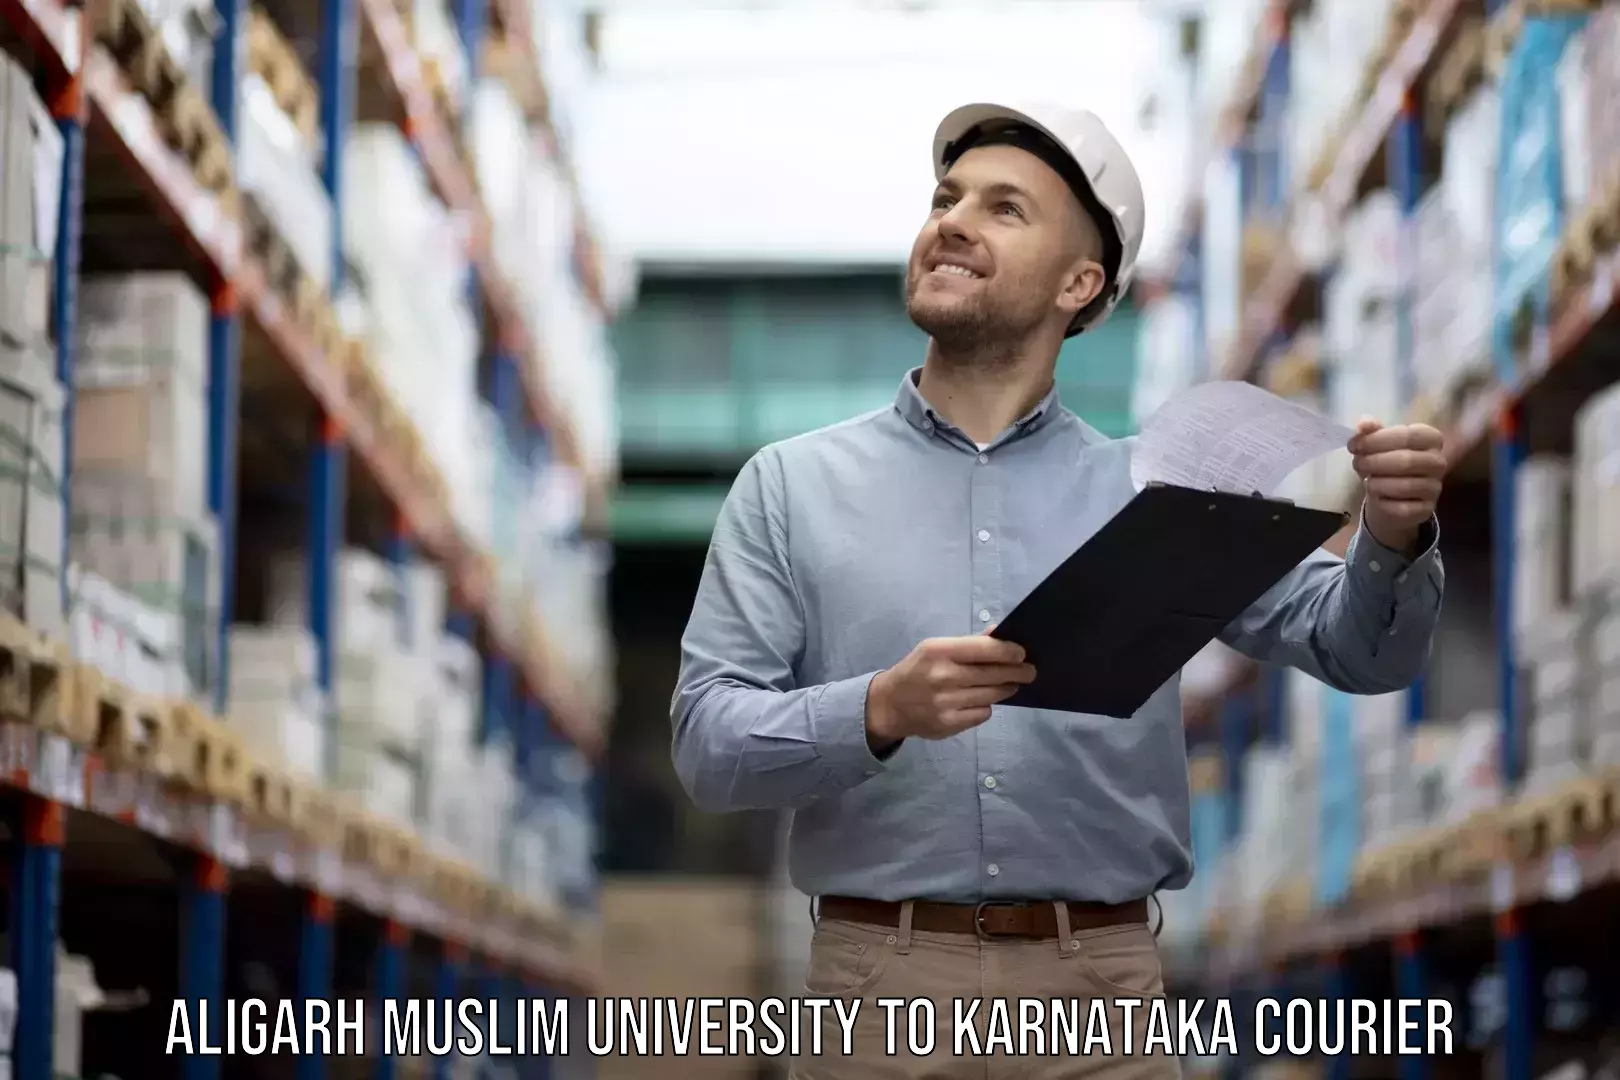 Expert packing and moving Aligarh Muslim University to Channapatna